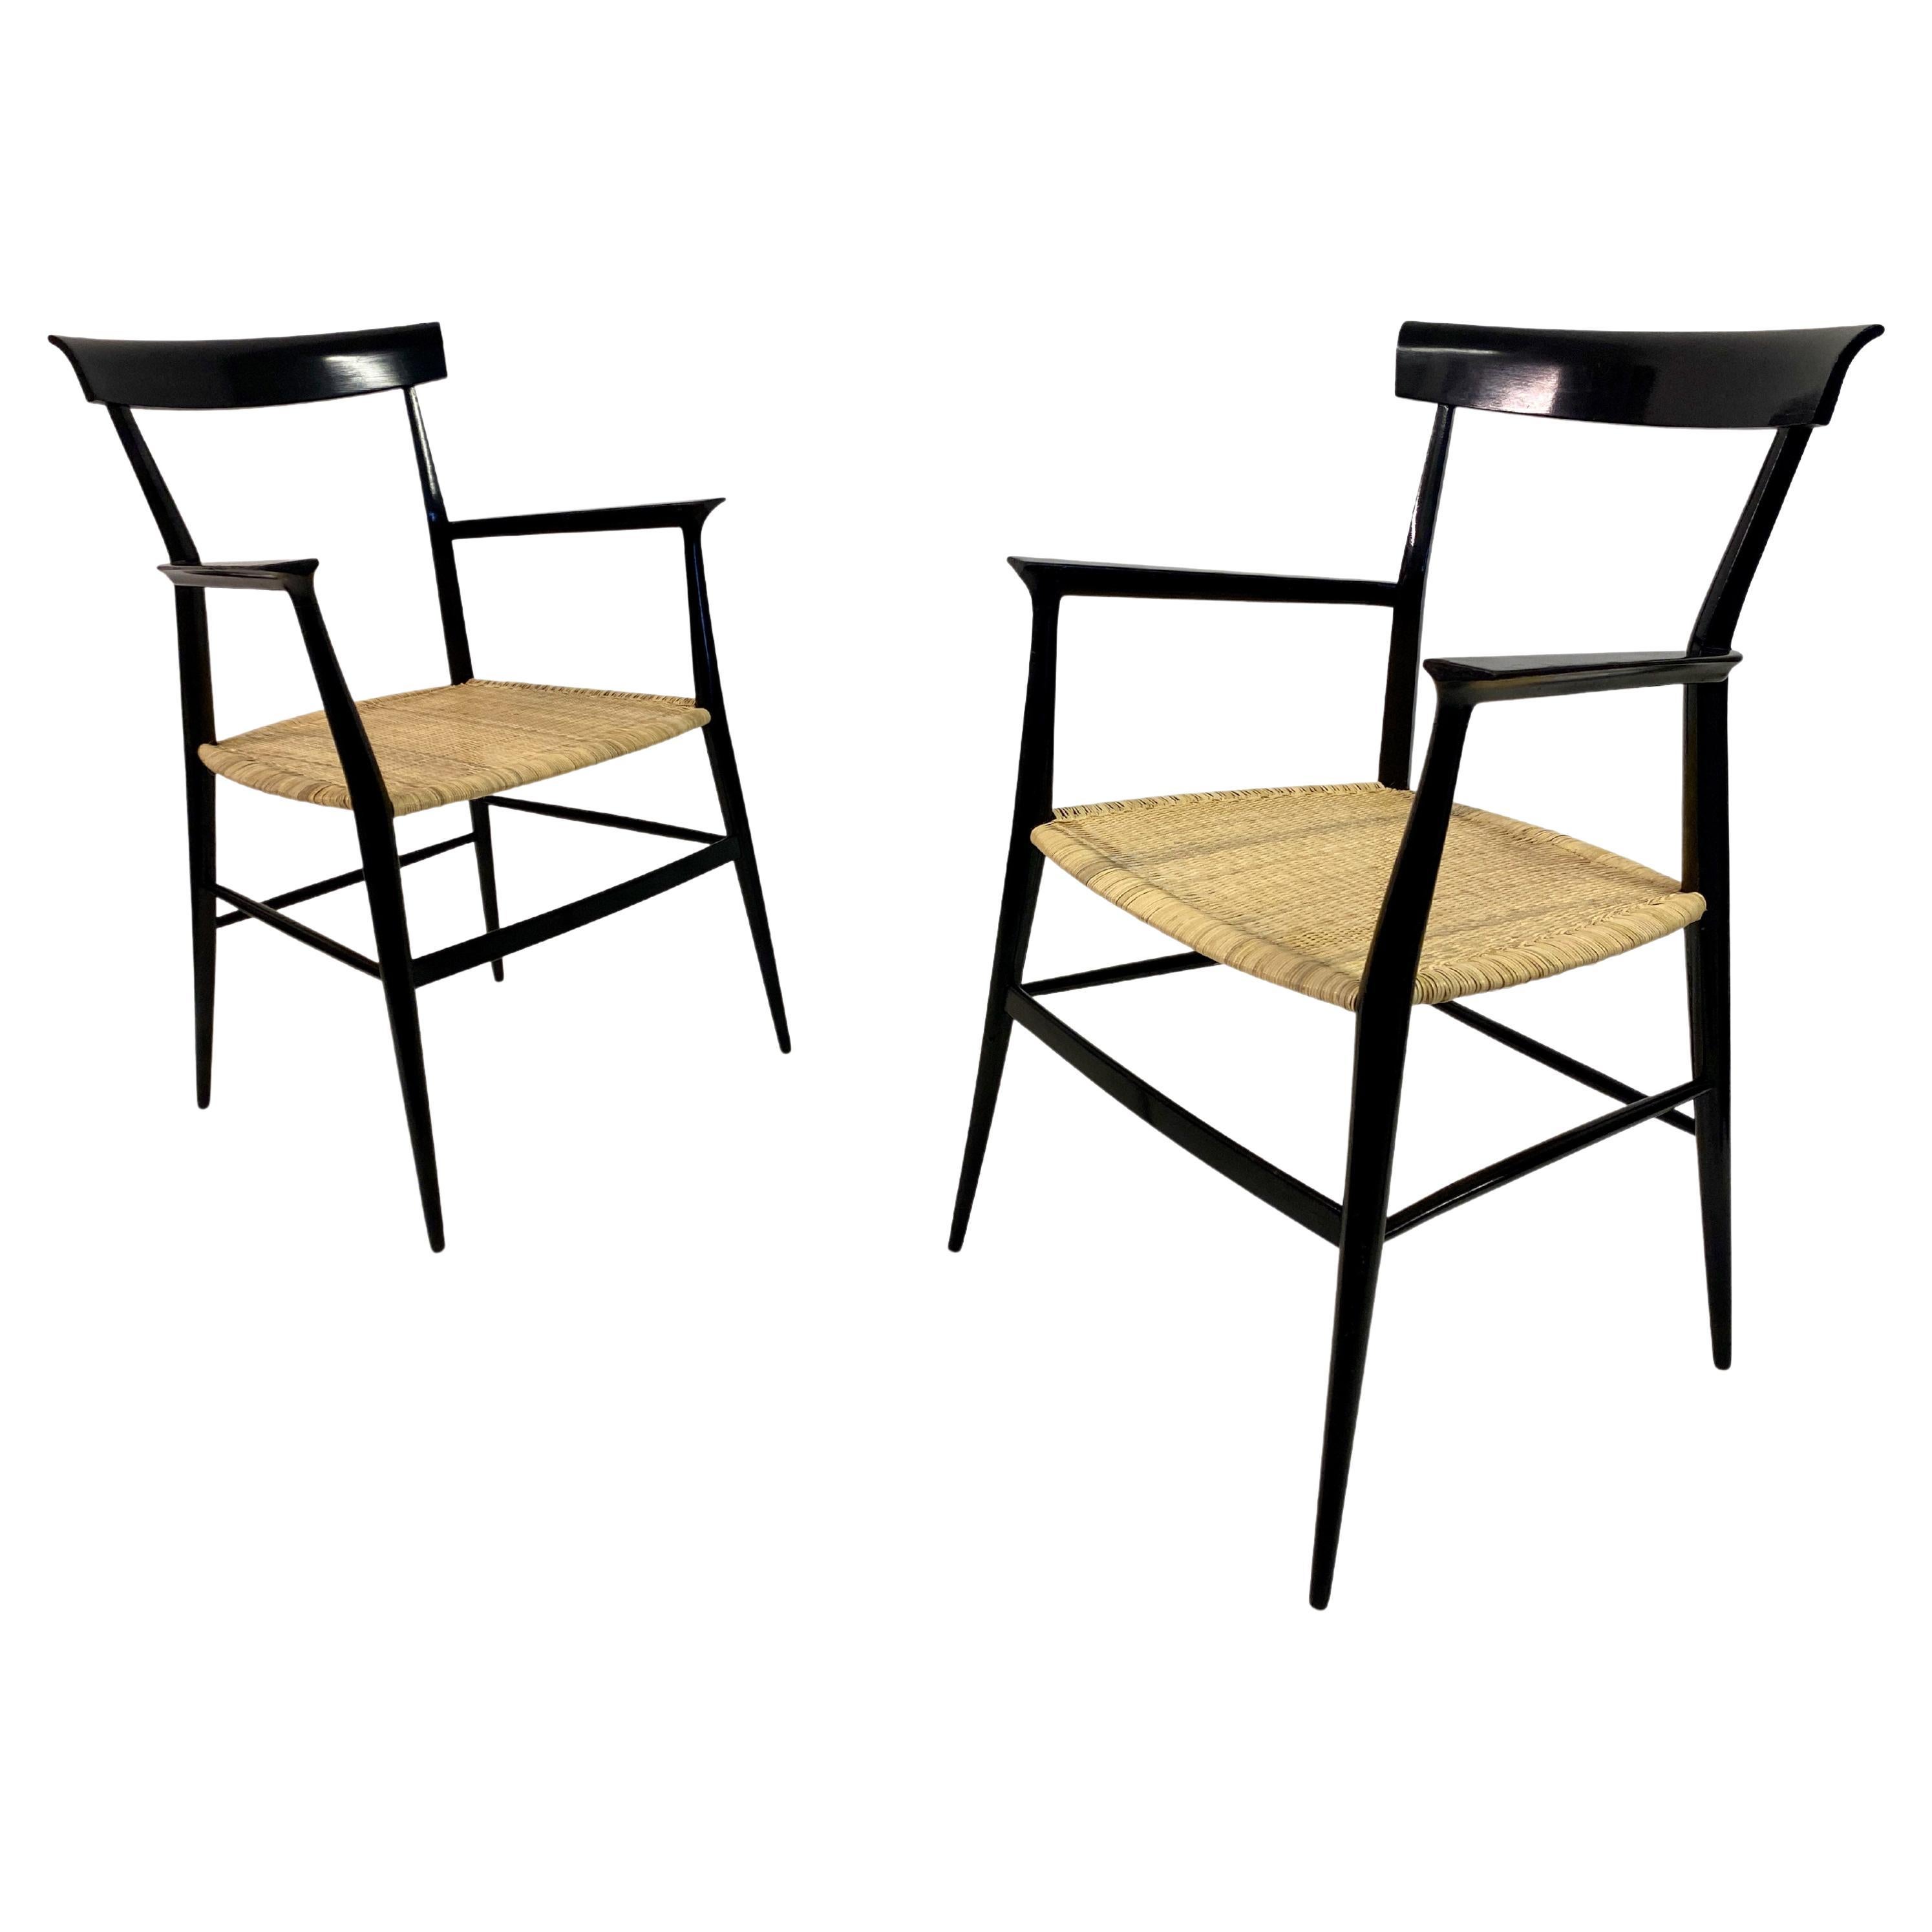 Pair of 1950s Tigullina Chairs by Colombo Sanguineti